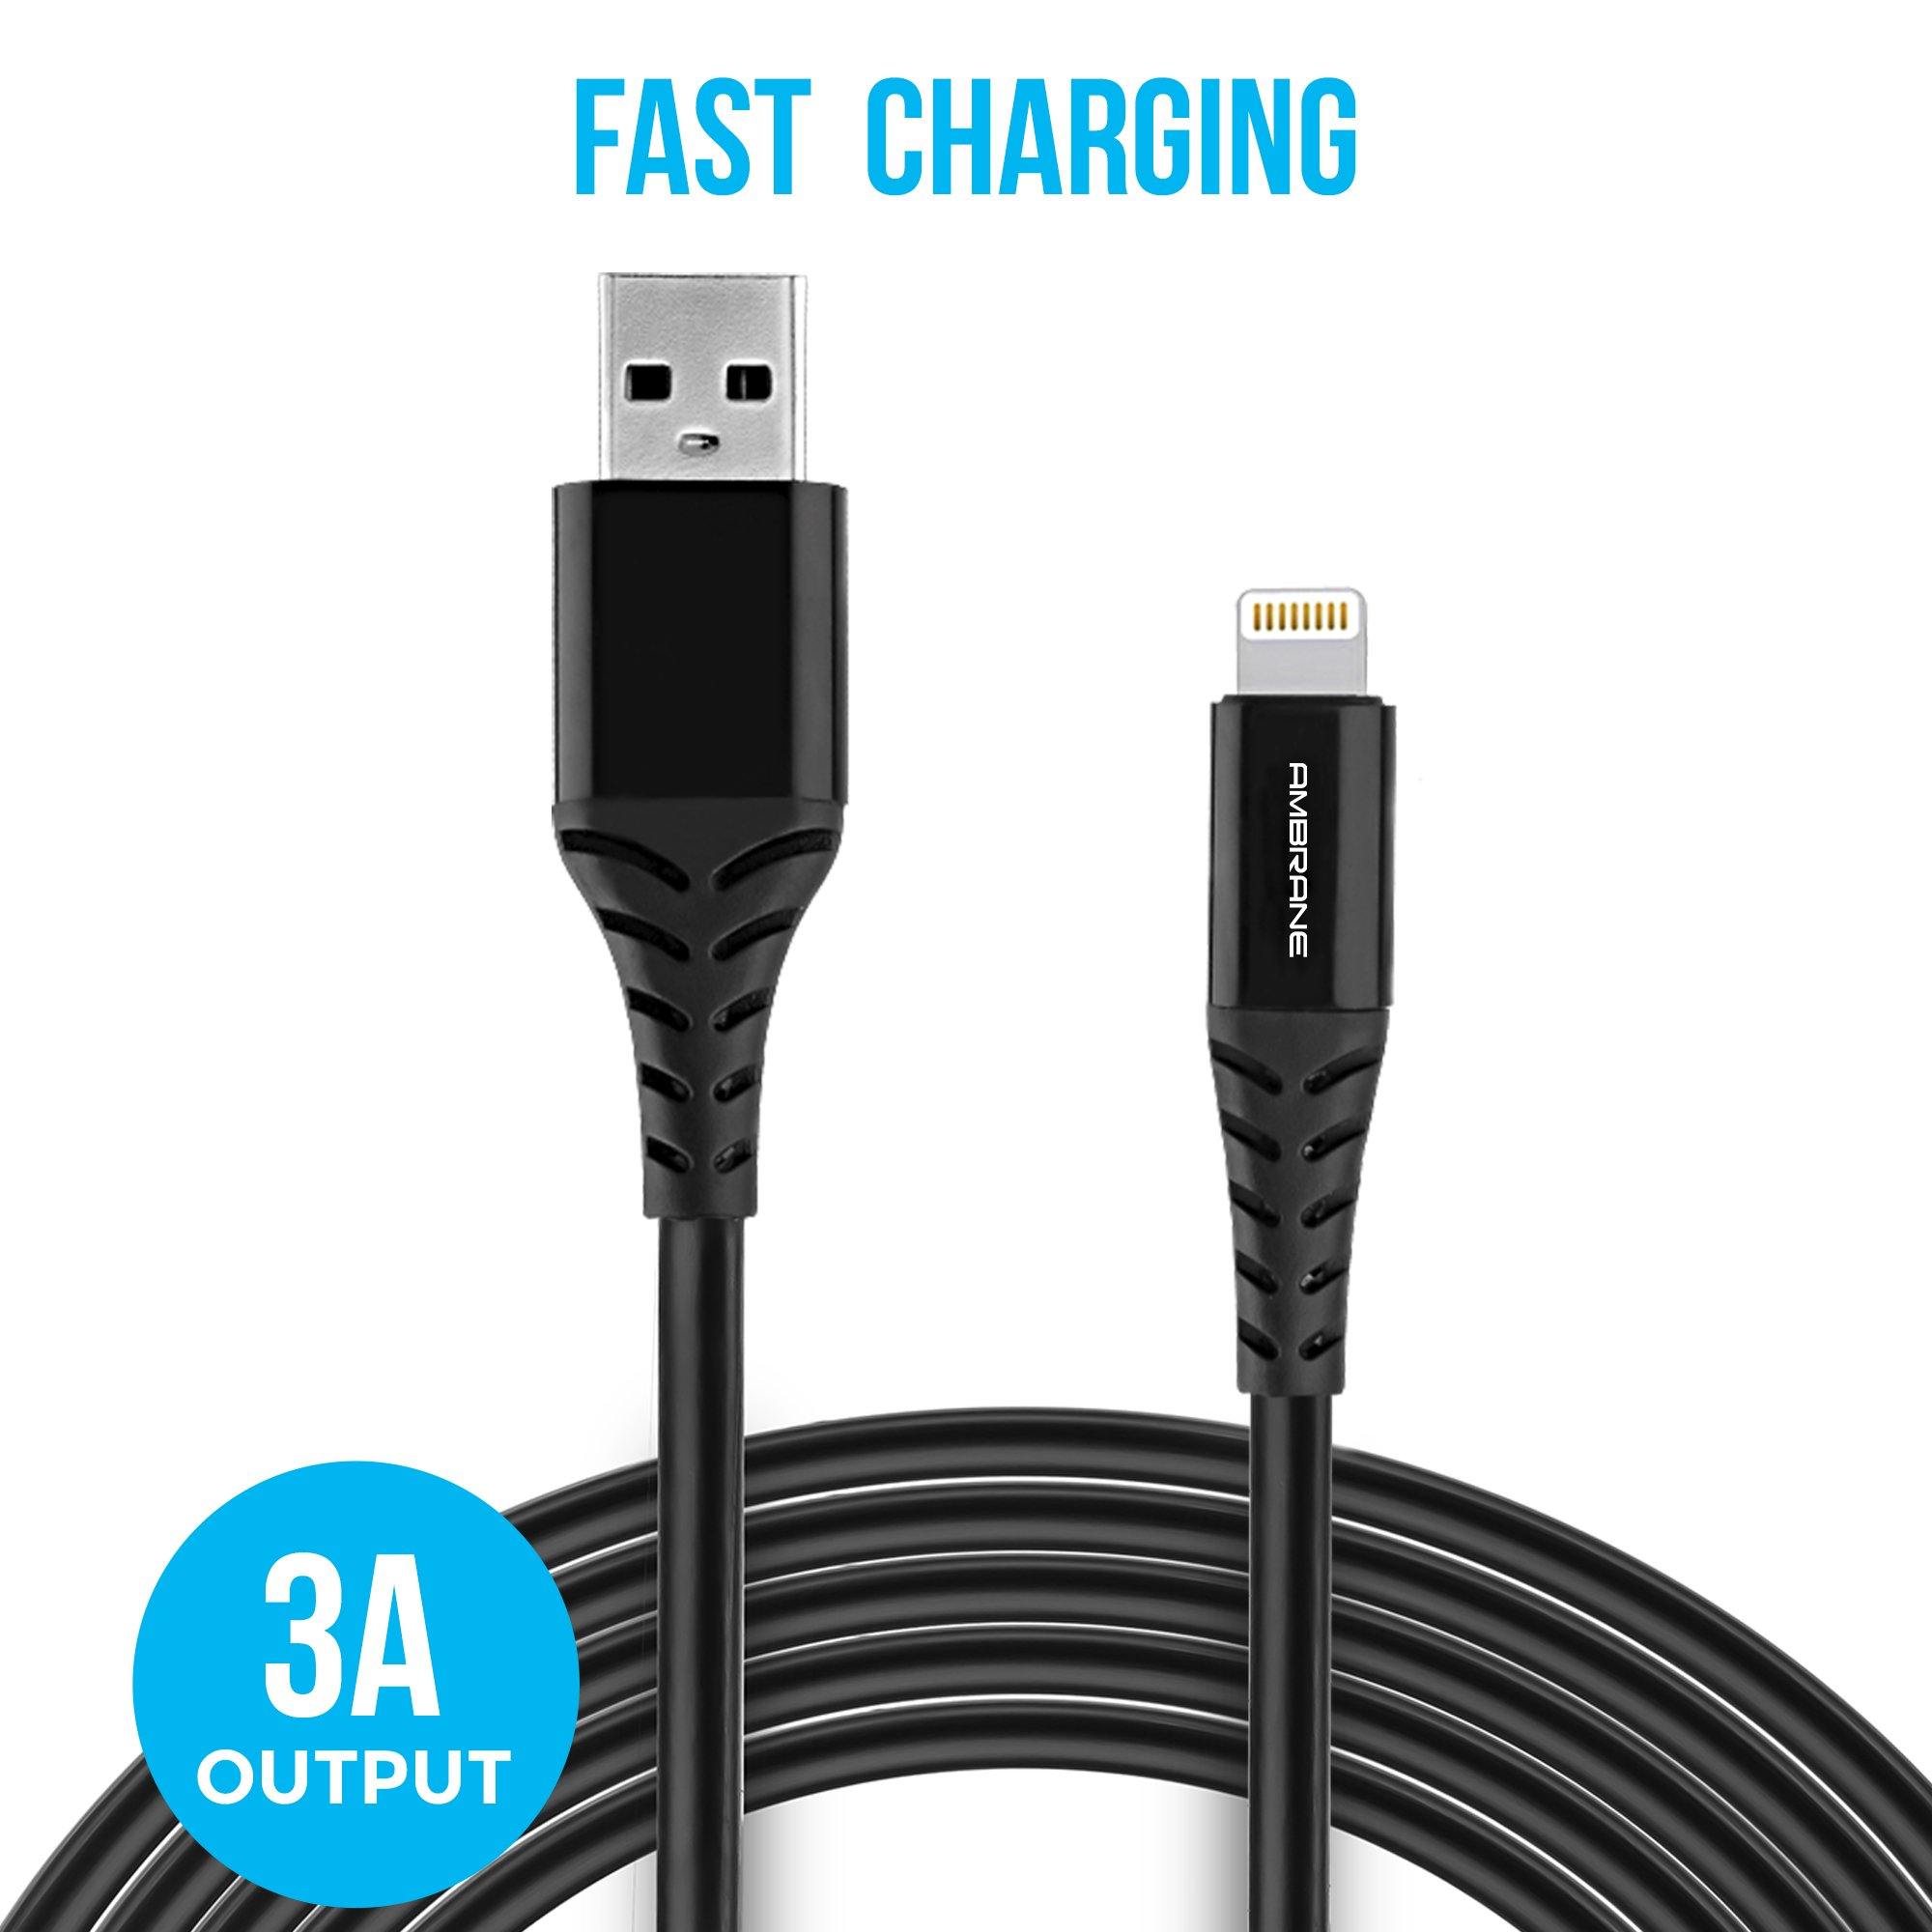 ACL-11 Plus 3A Iphone Lighting Cable, 1 Meter (Black) - AmbraneIndia